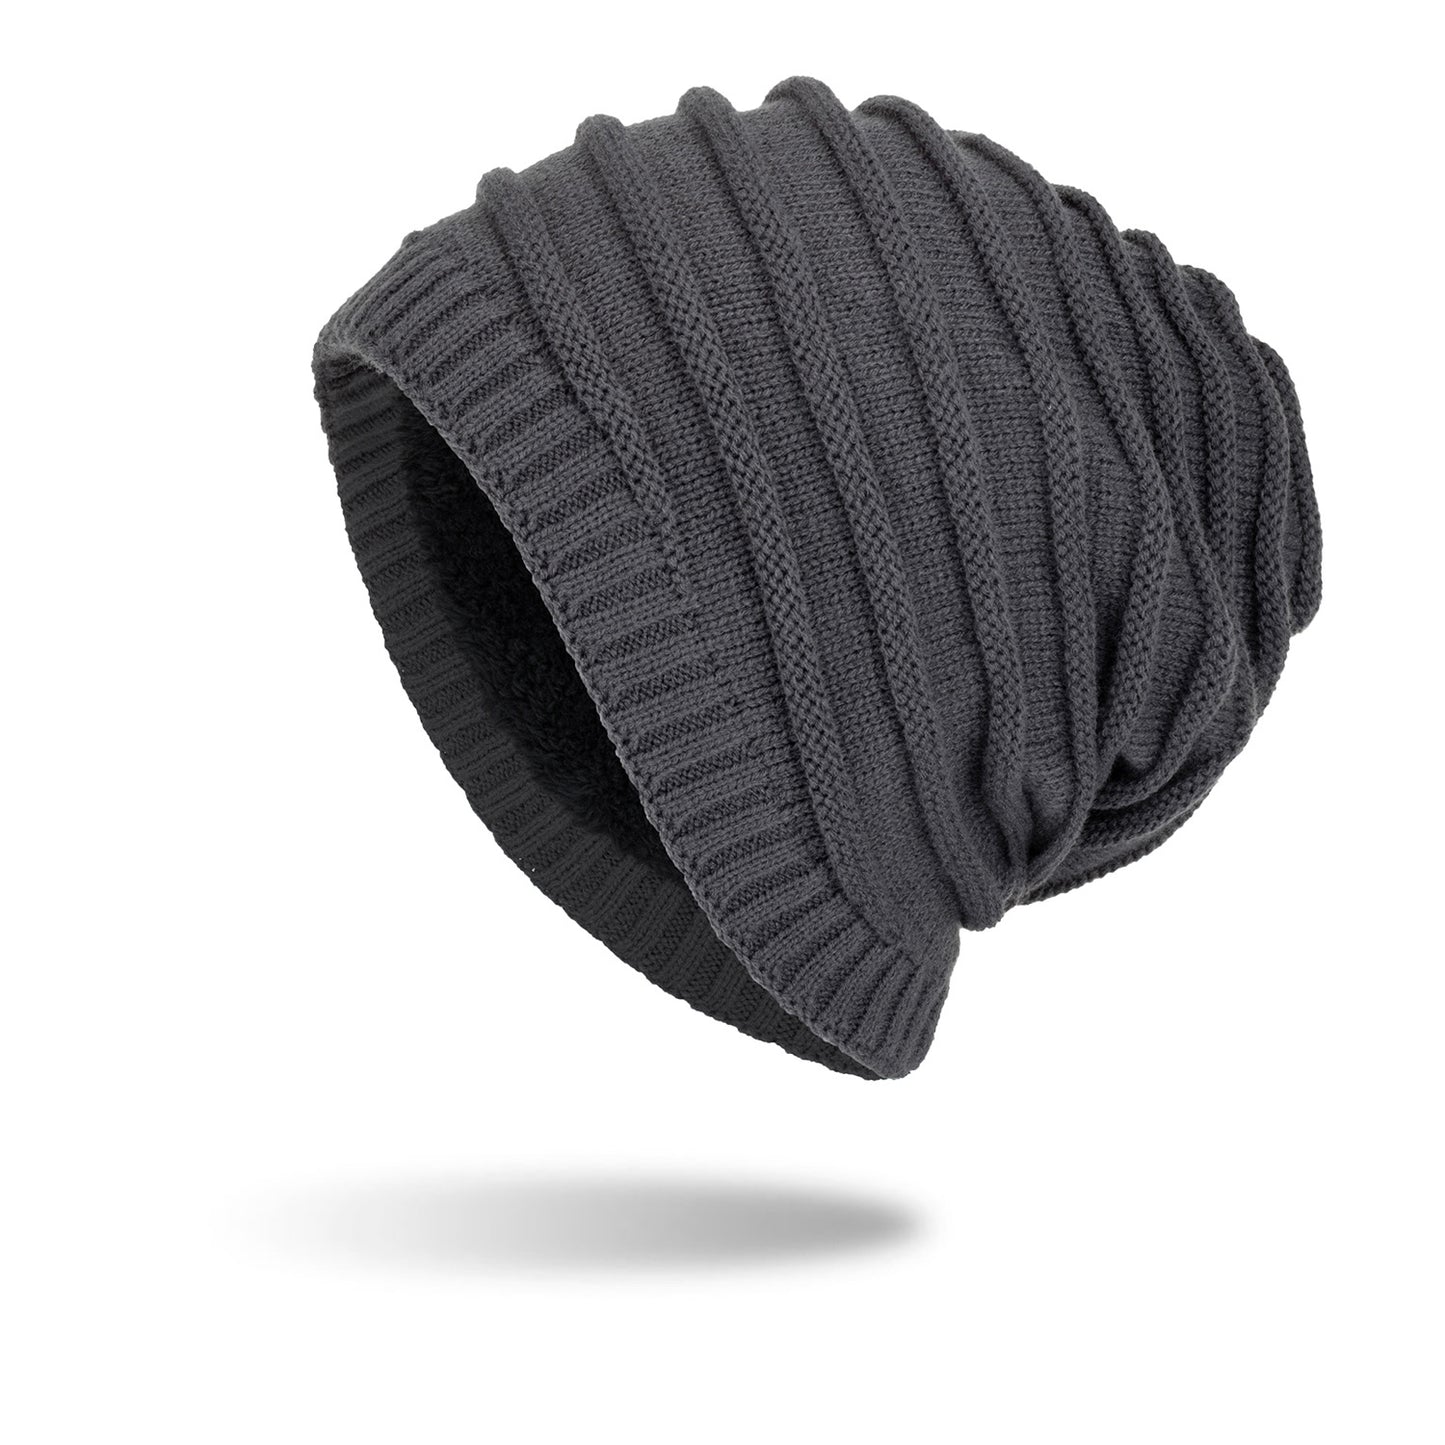 Men's Plush Sweater Hat with Ear Guards: Outdoor Warmth and Comfort